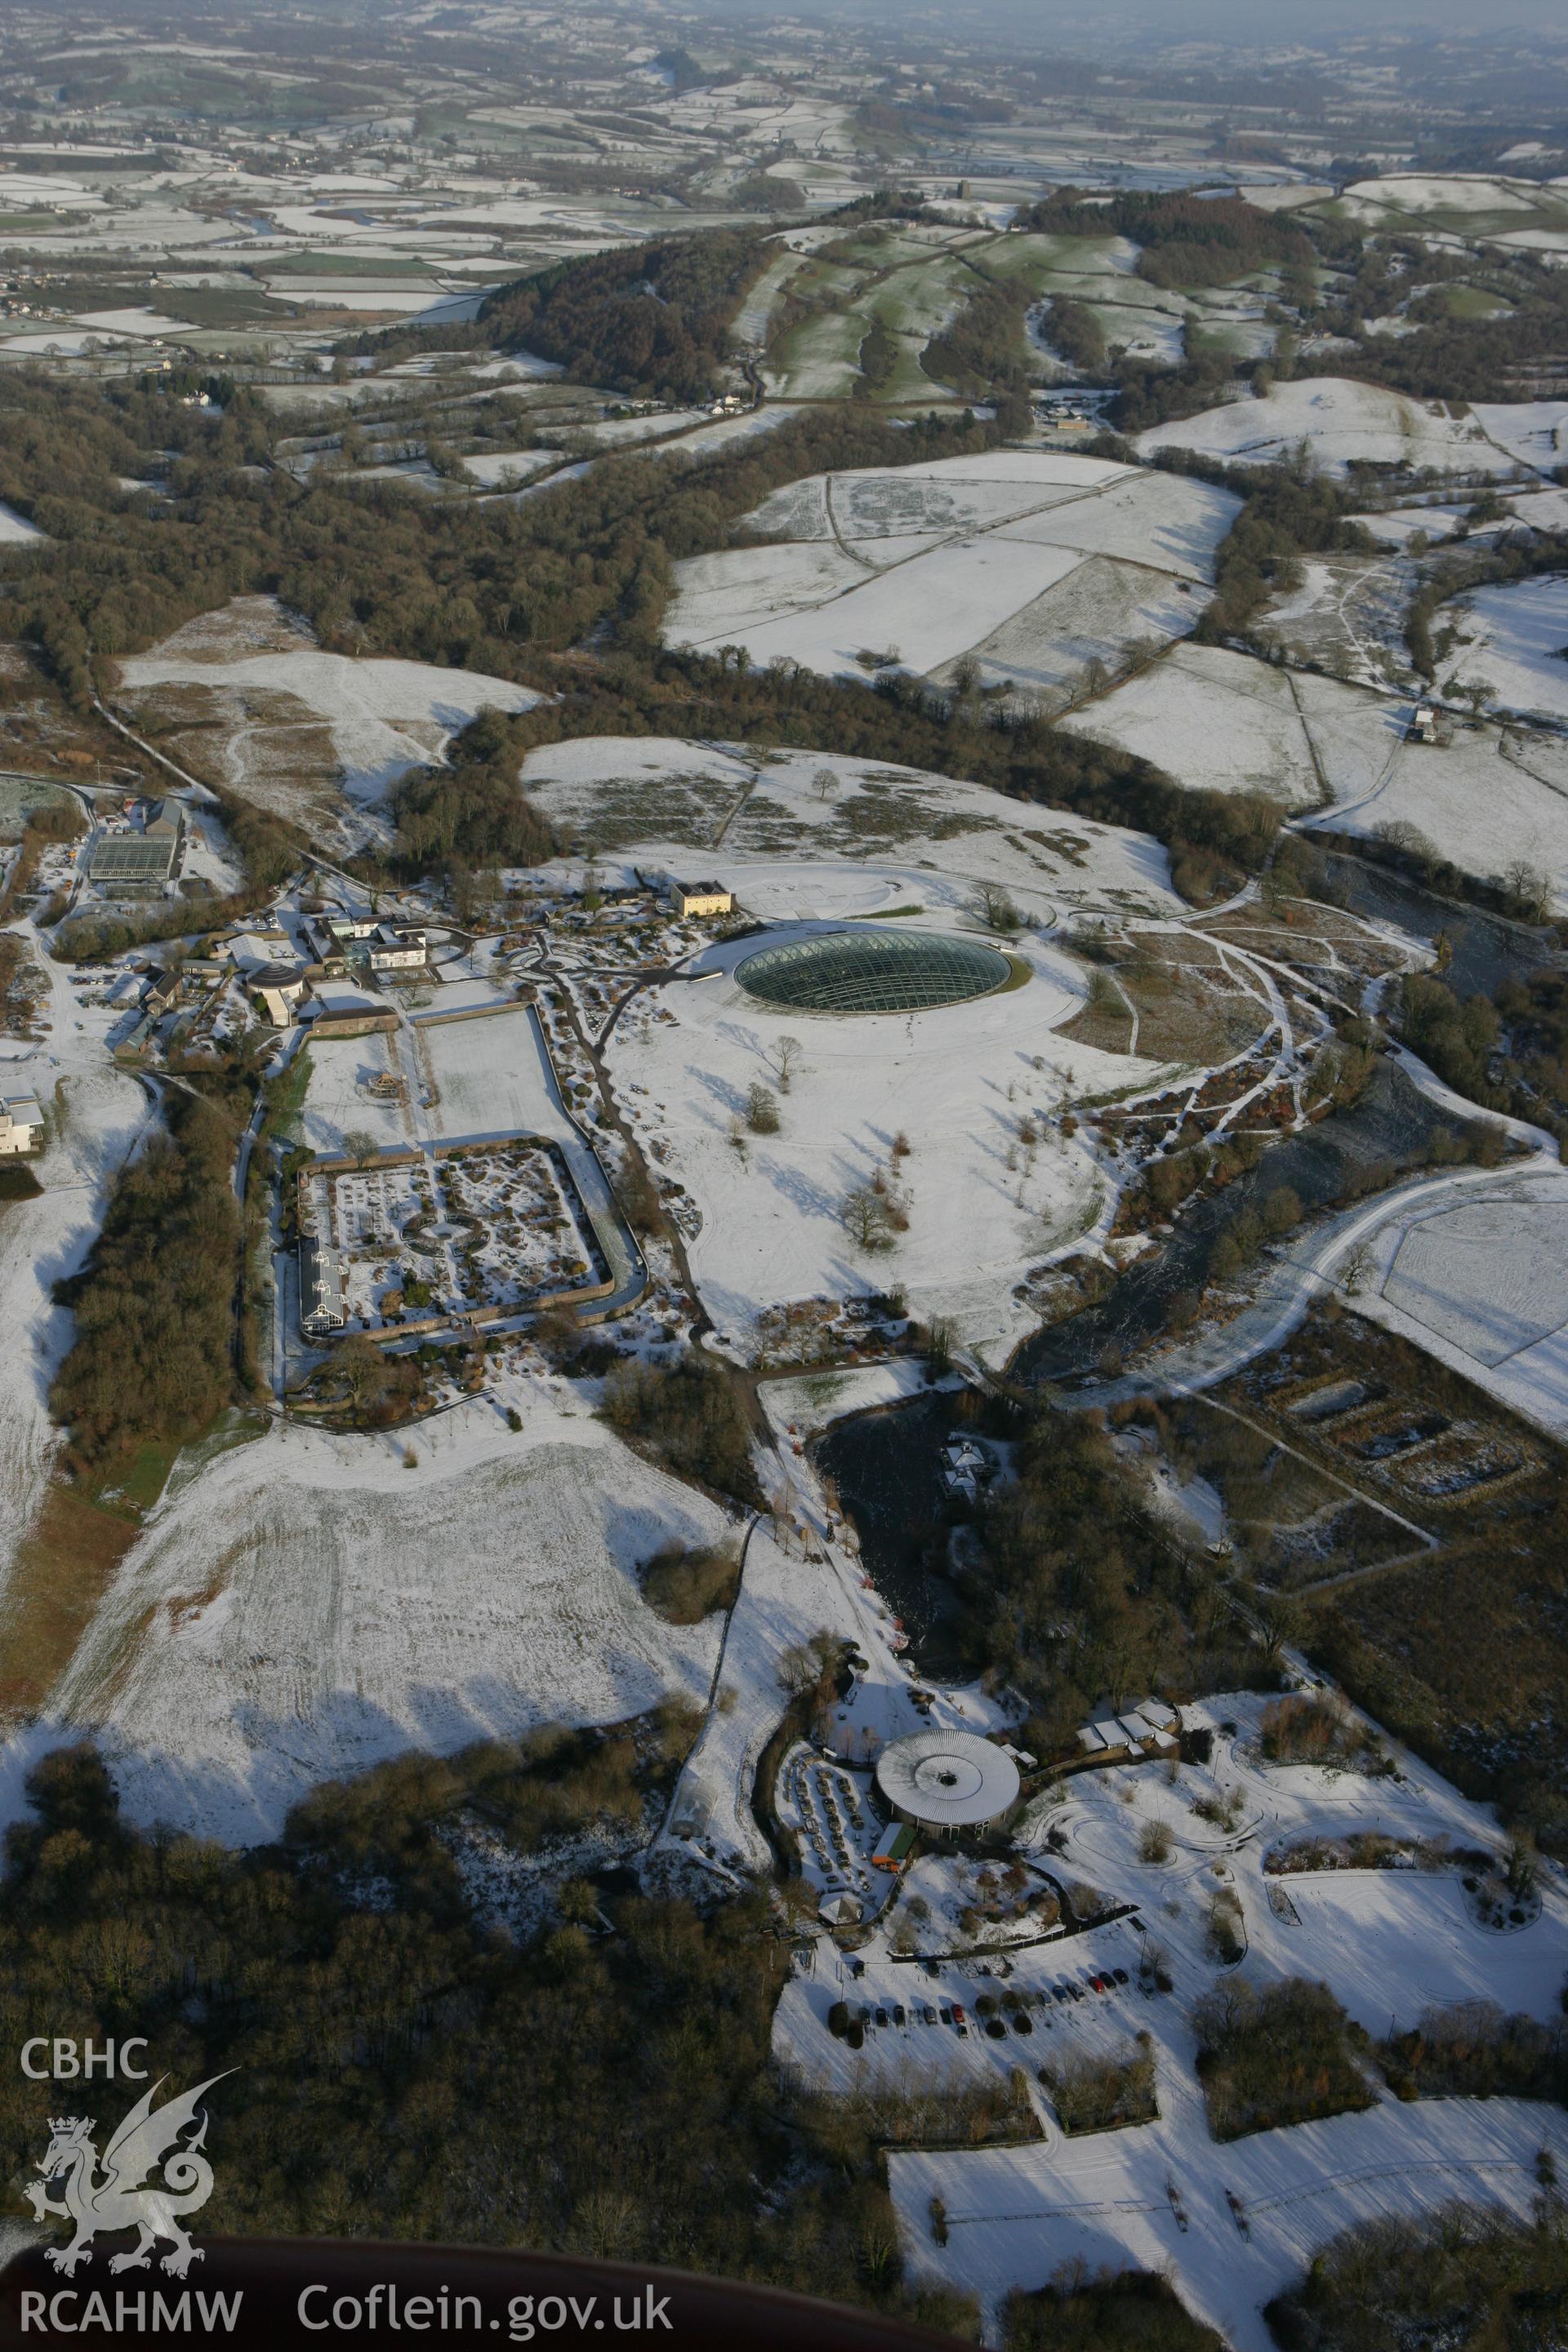 RCAHMW colour oblique photograph of the National Botanic Garden of Wales, with snow. Taken by Toby Driver on 01/12/2010.